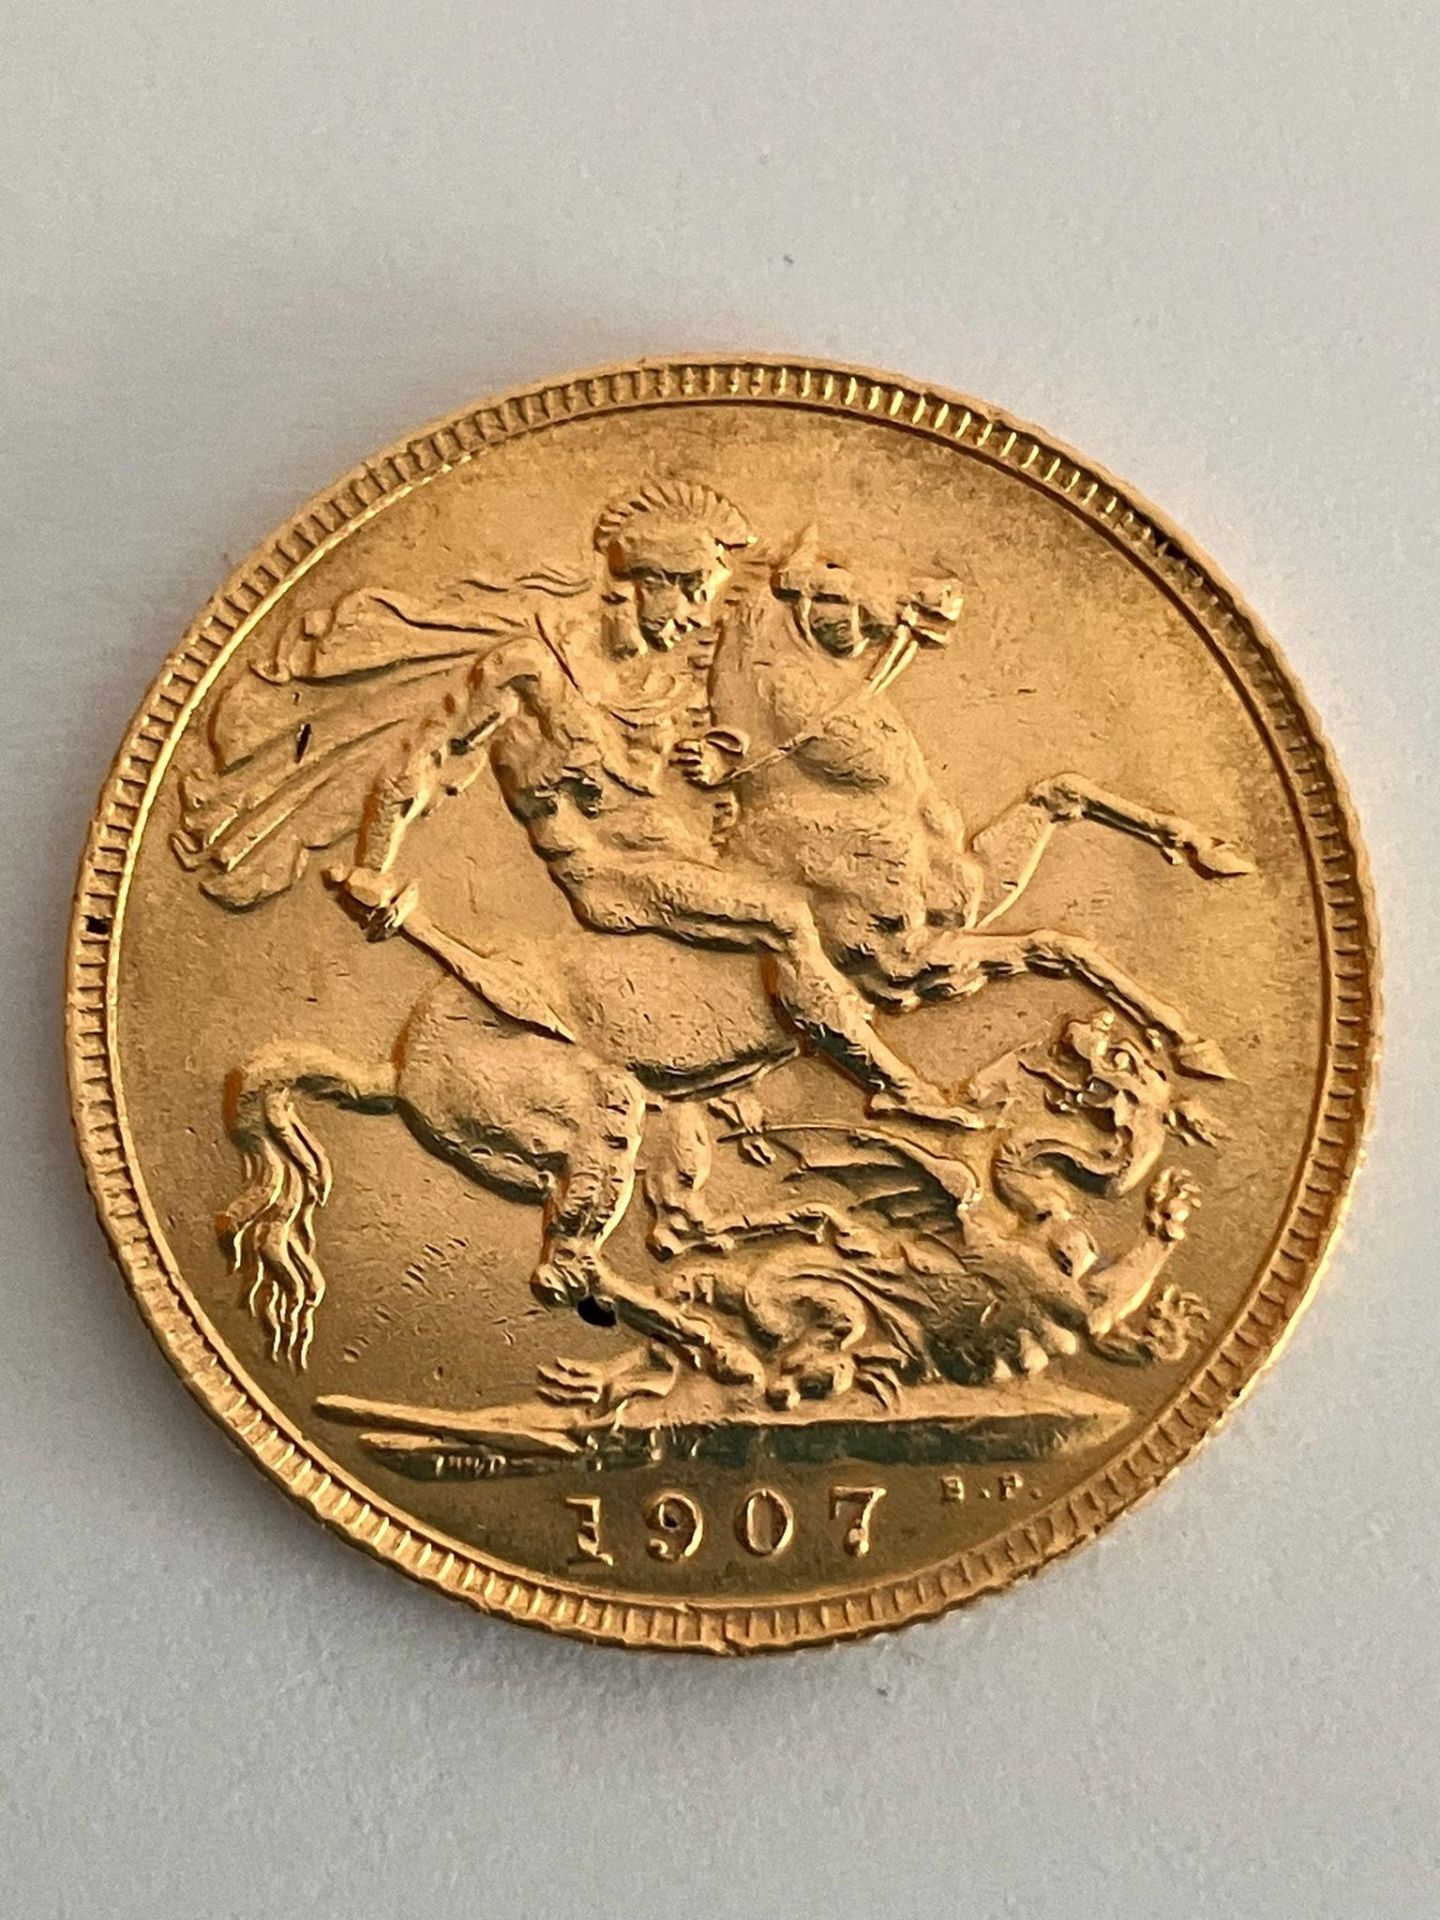 1907 GOLD SOVEREIGN. Very fine condition. Probably extra fine with a gentle clean. Please see